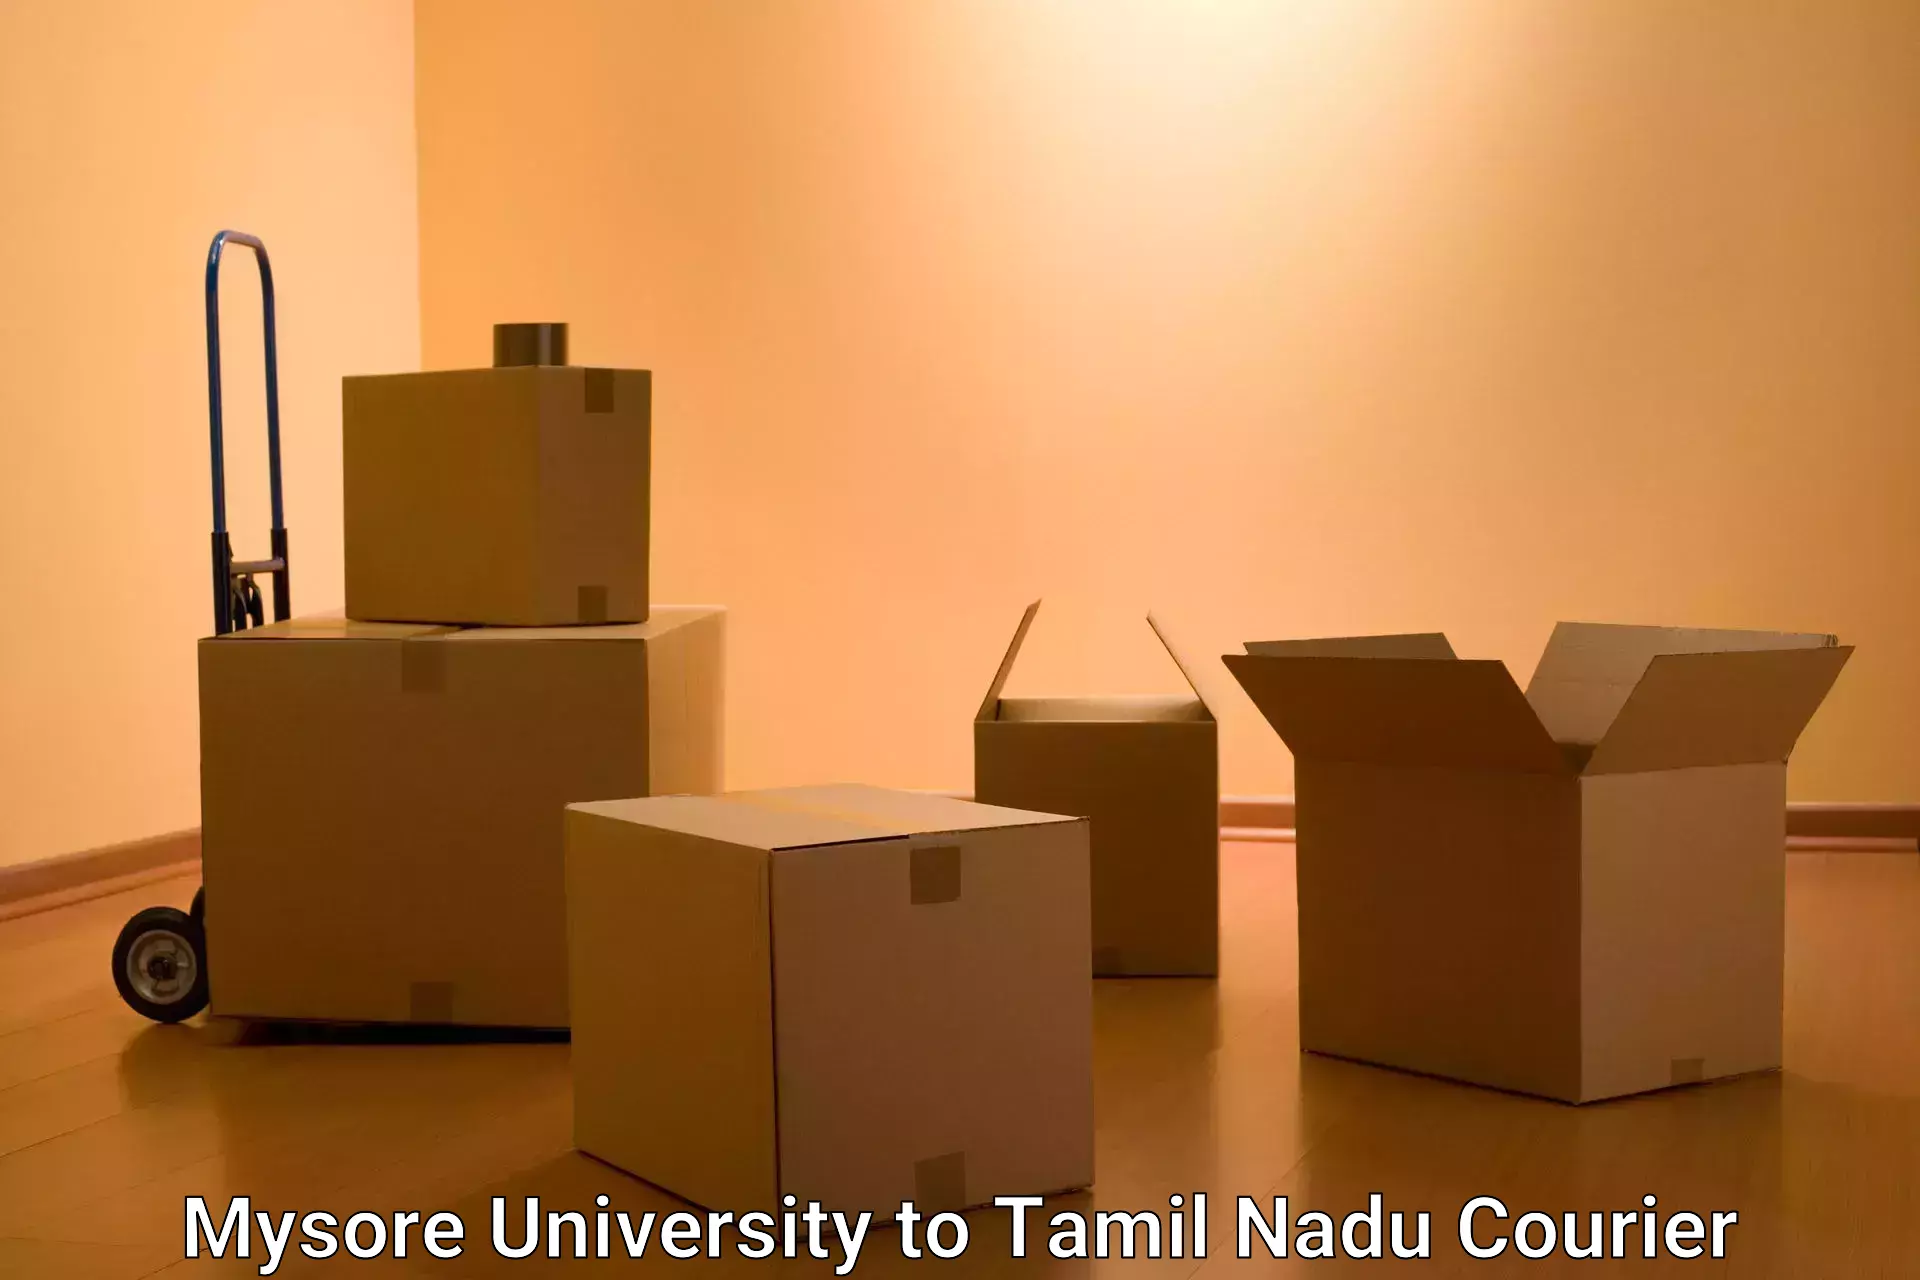 Specialized courier services Mysore University to Tamil Nadu